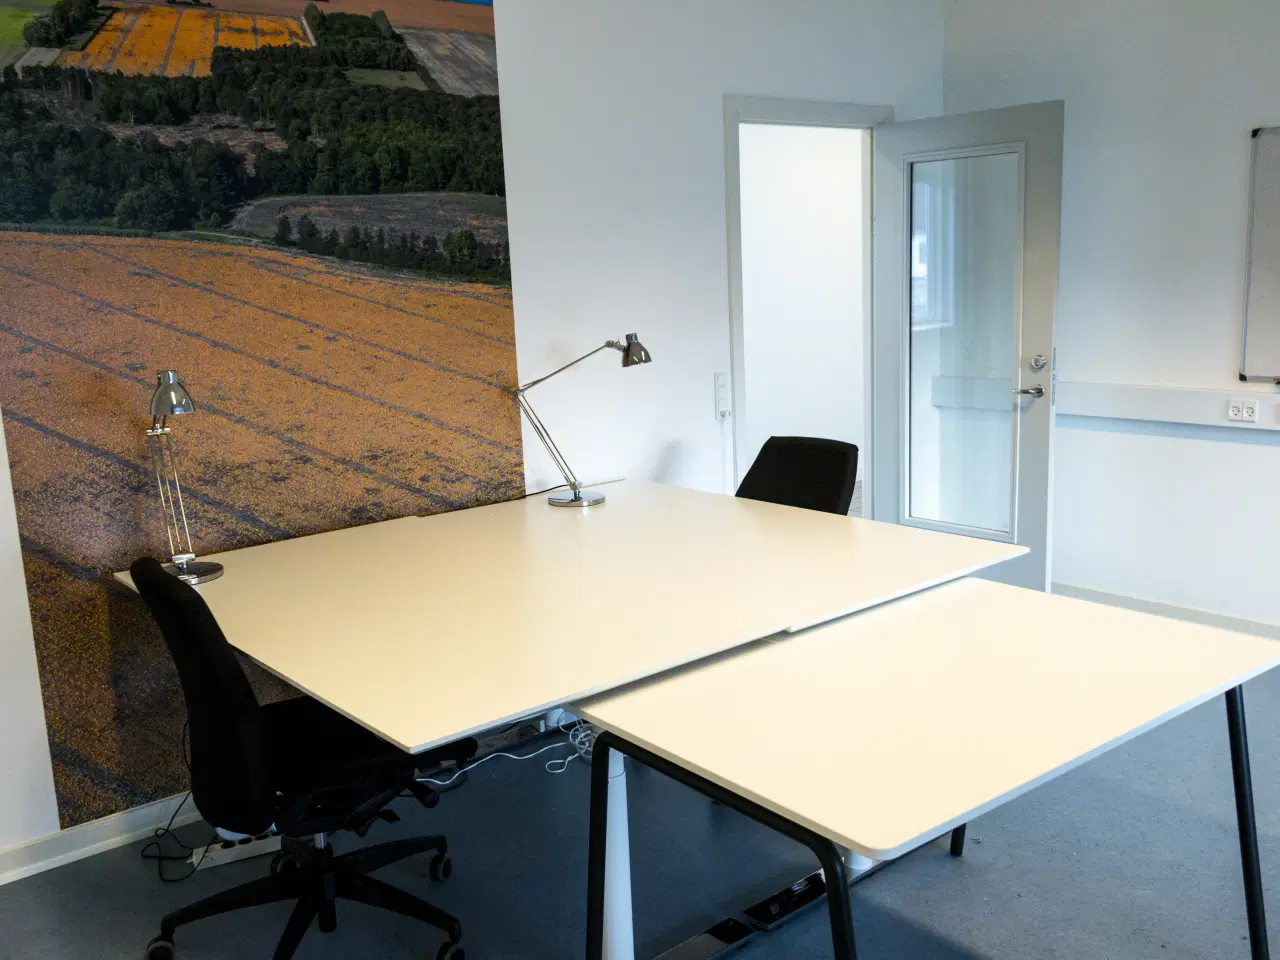 Billede 7 - Offices for drone business in the drone test center